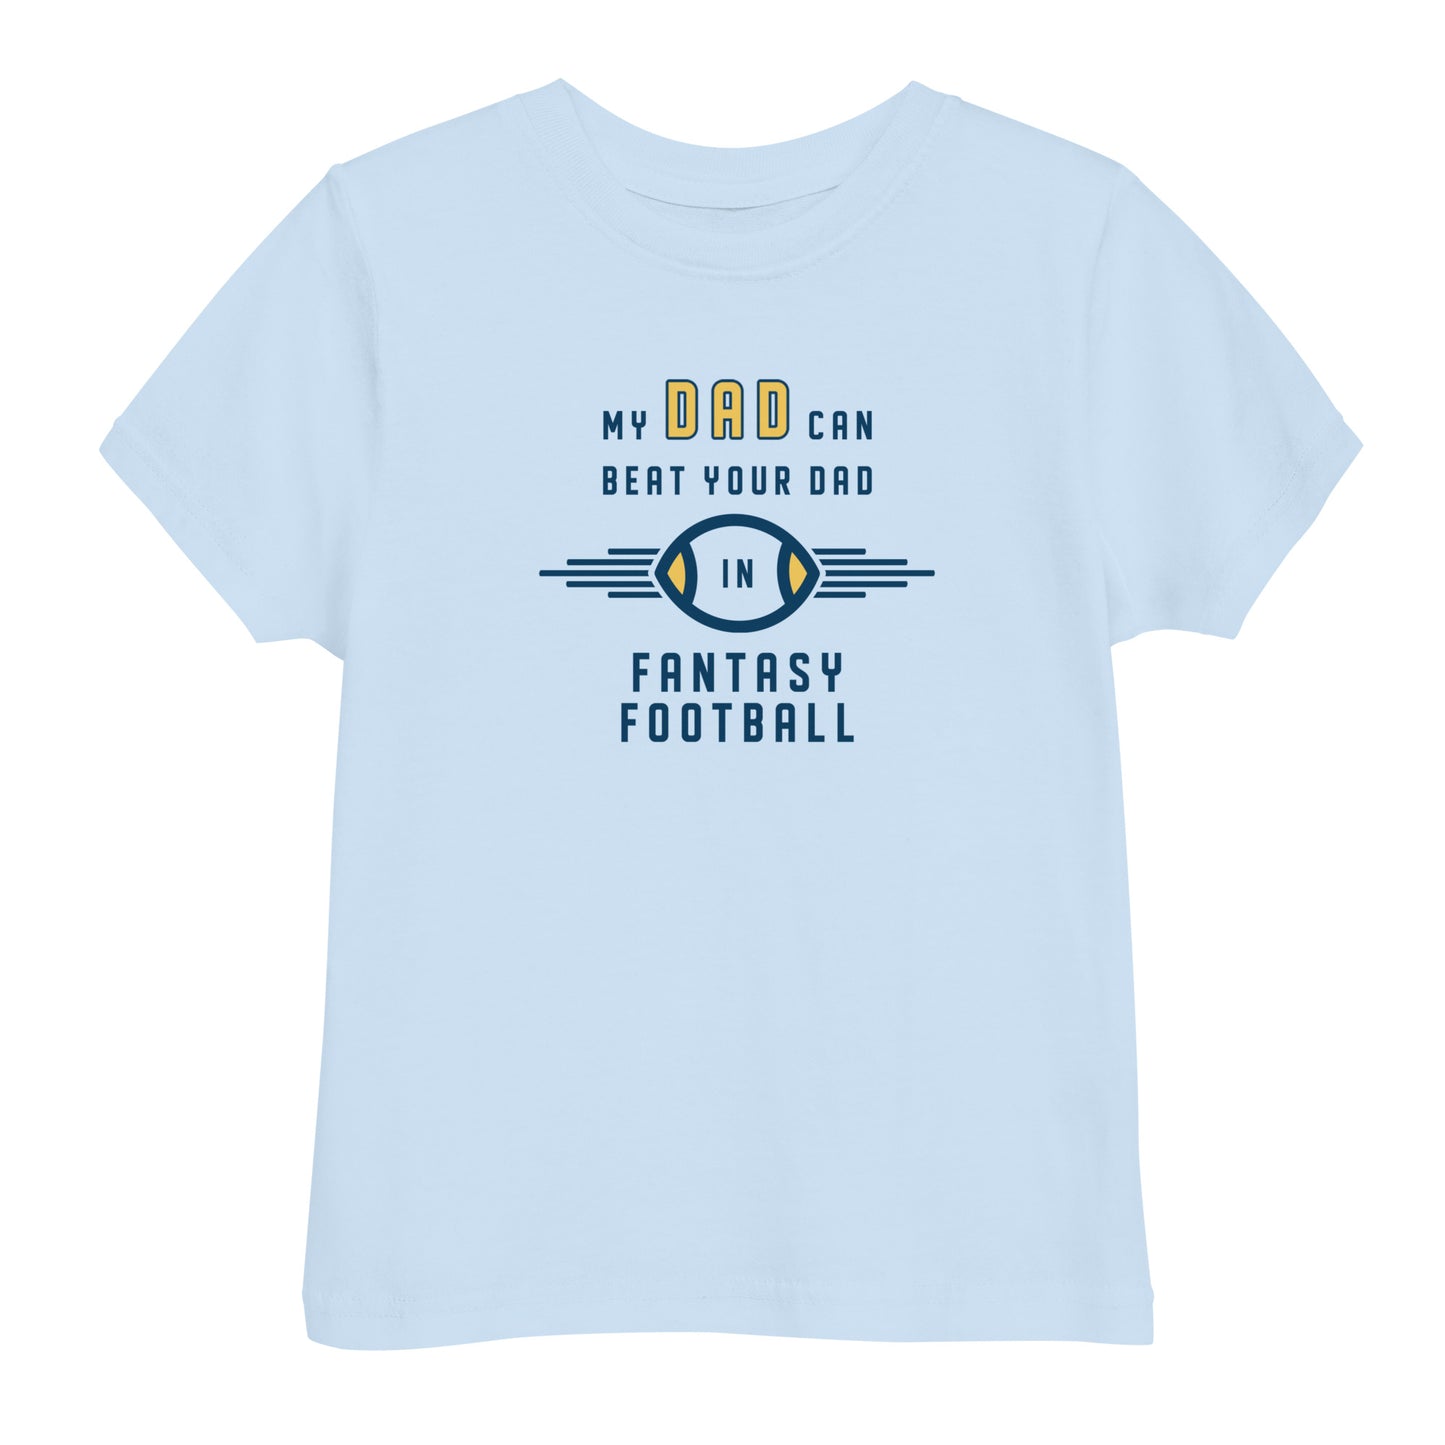 My dad can beat your dad in Fantasy Football - Toddler jersey t-shirt